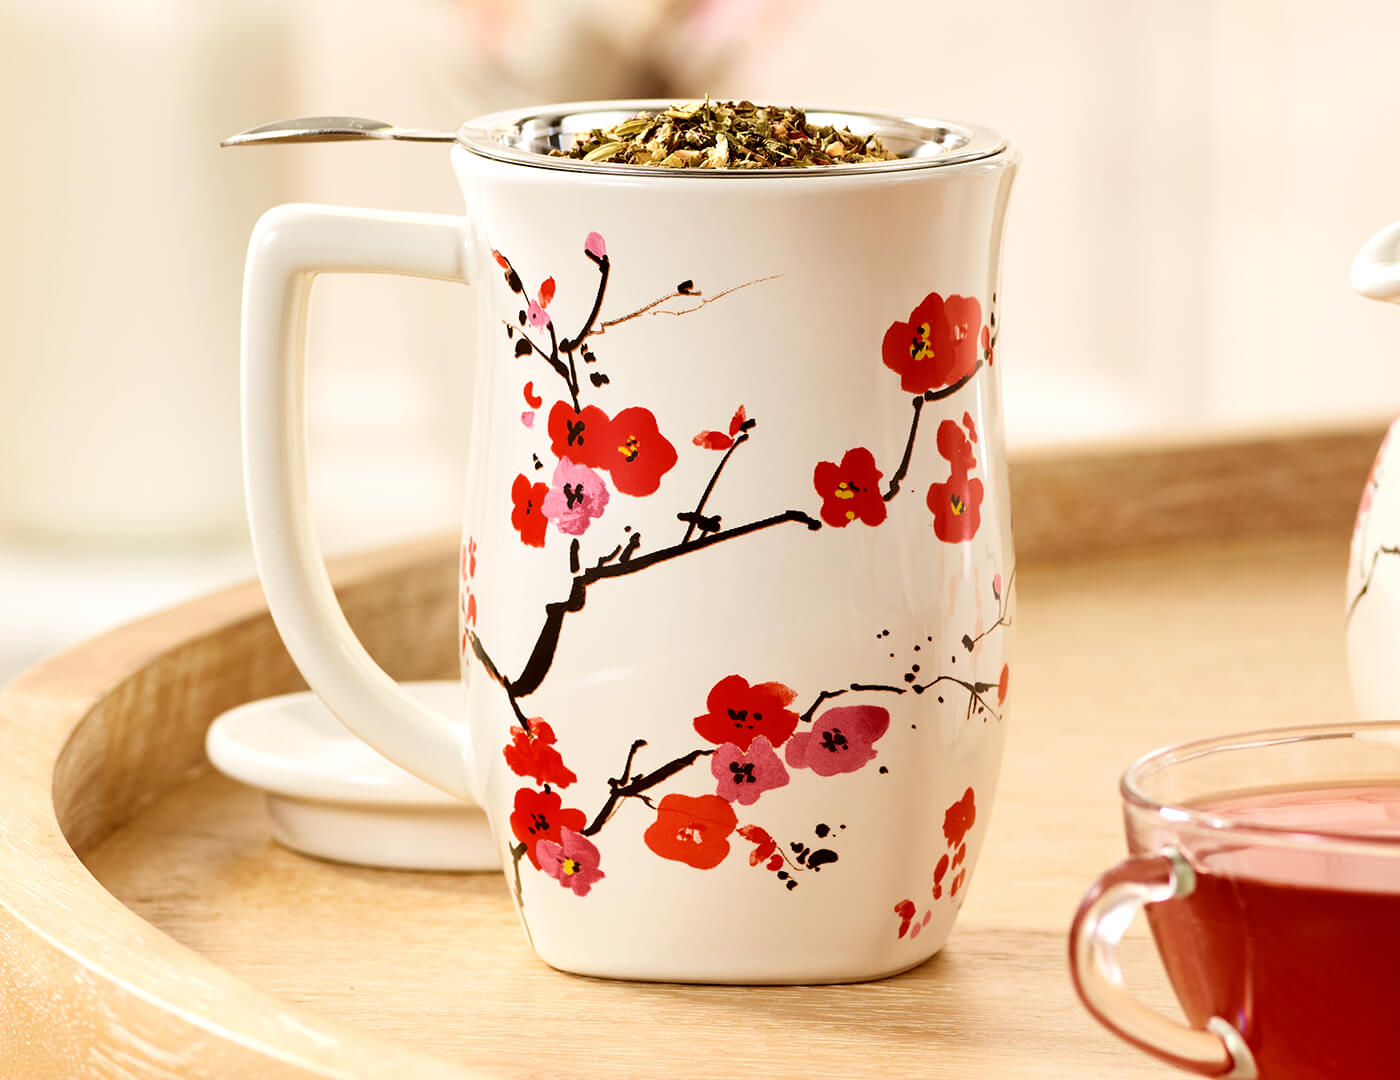 Fiore Sakura Steeping Cup with lid off and loose leaf tea inside the infuser